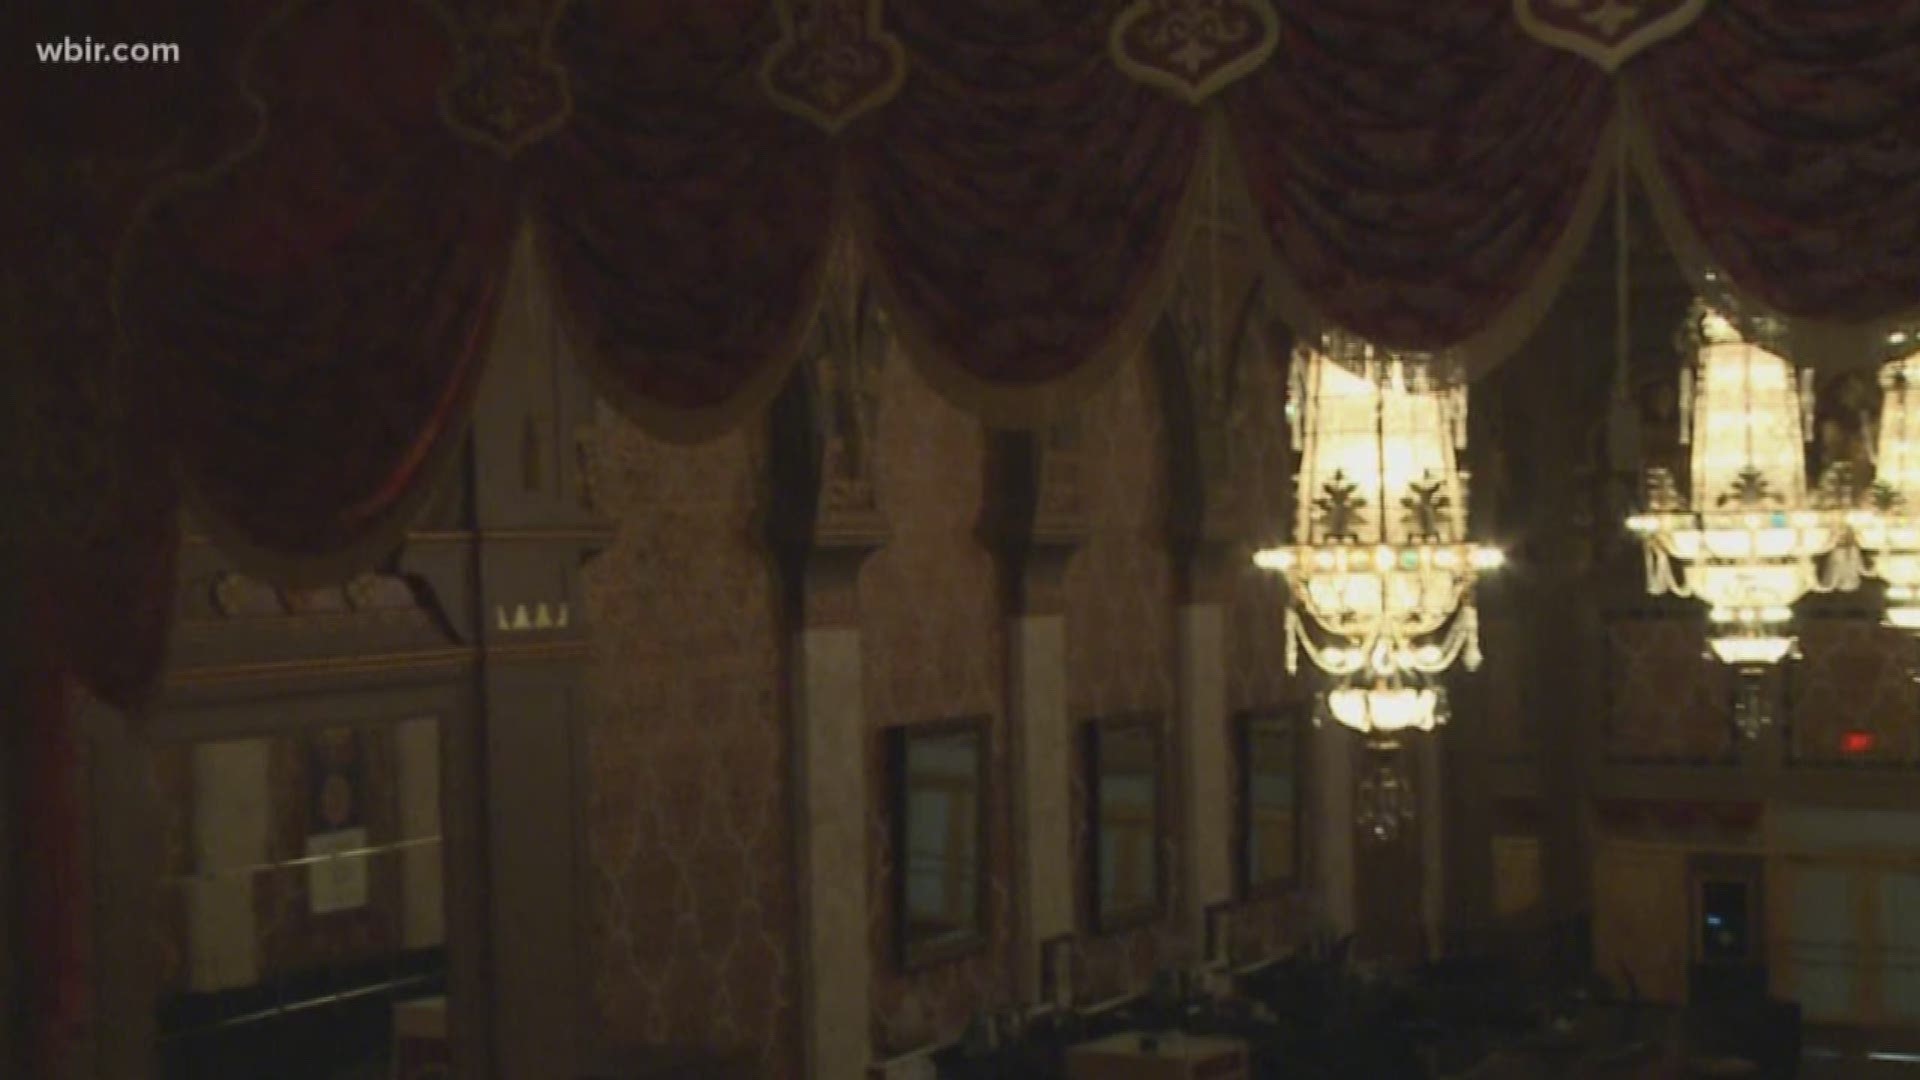 How many doors are there in the Tennessee? Who are the lobby chandeliers named after?